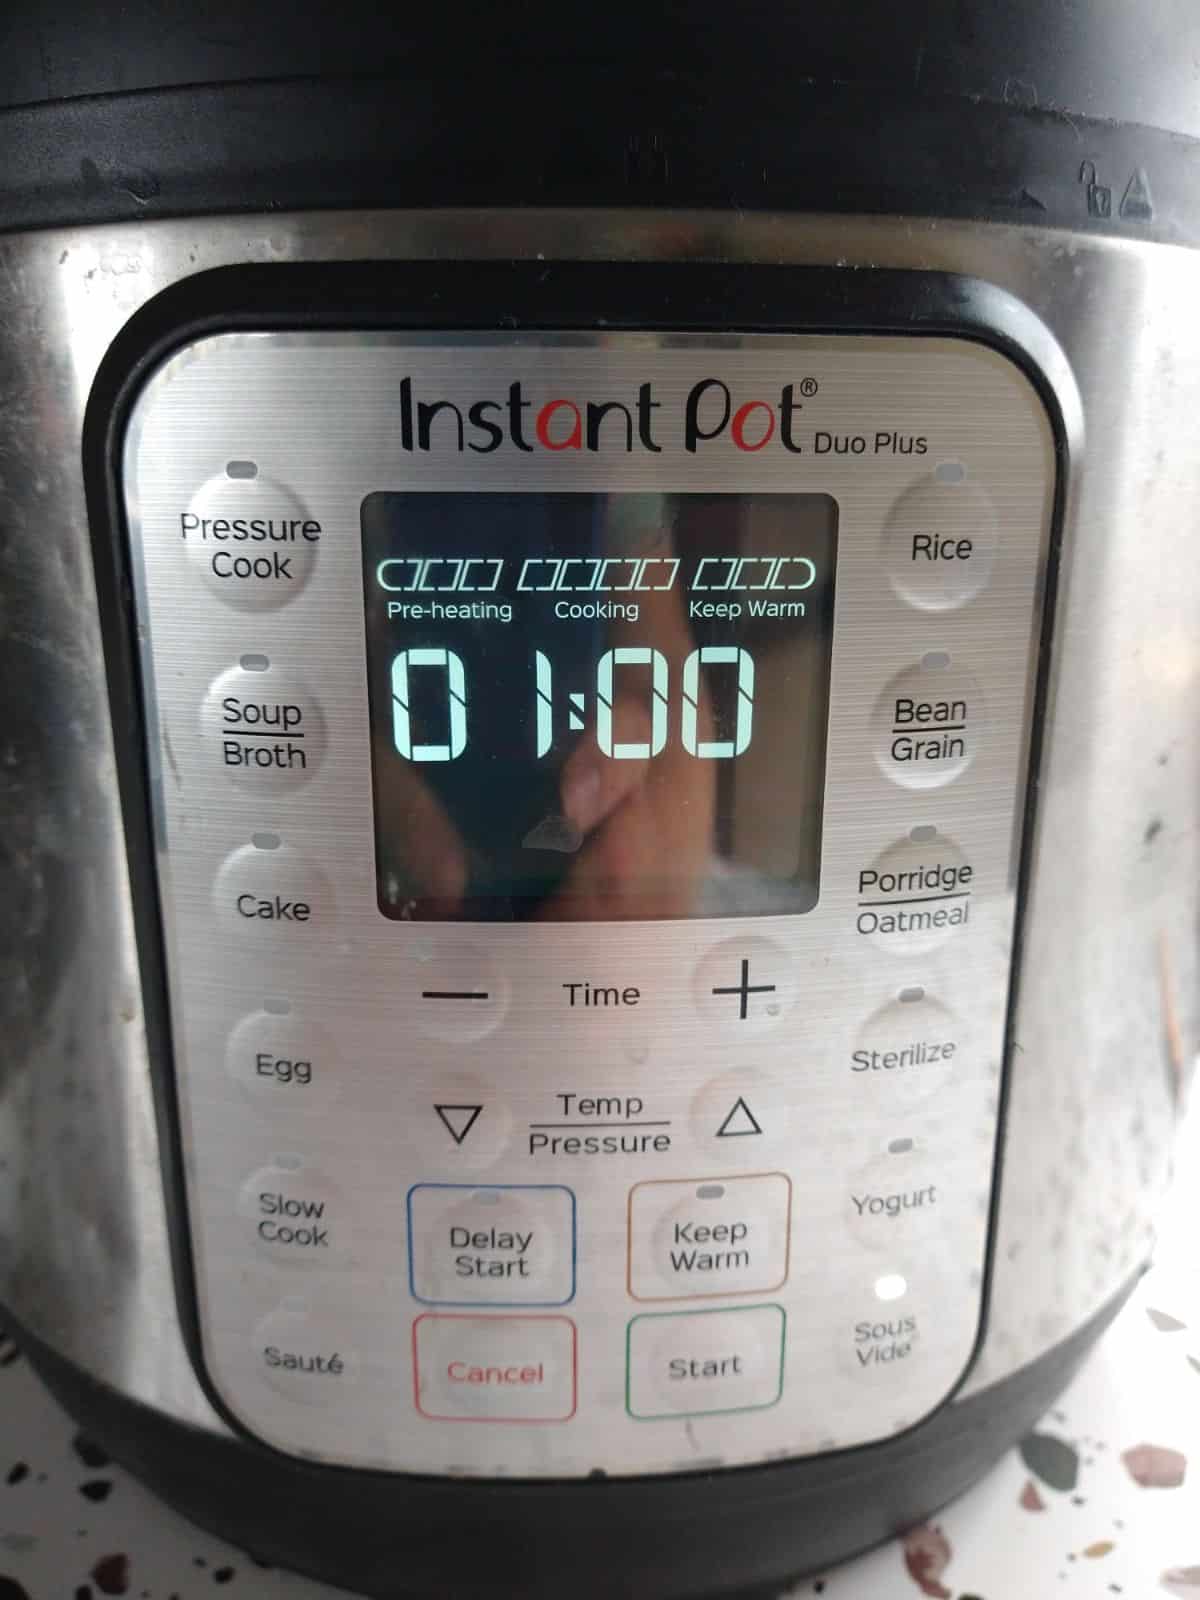 The Instant Pot Duo Plus set to 1 hour for sous vide cooking.